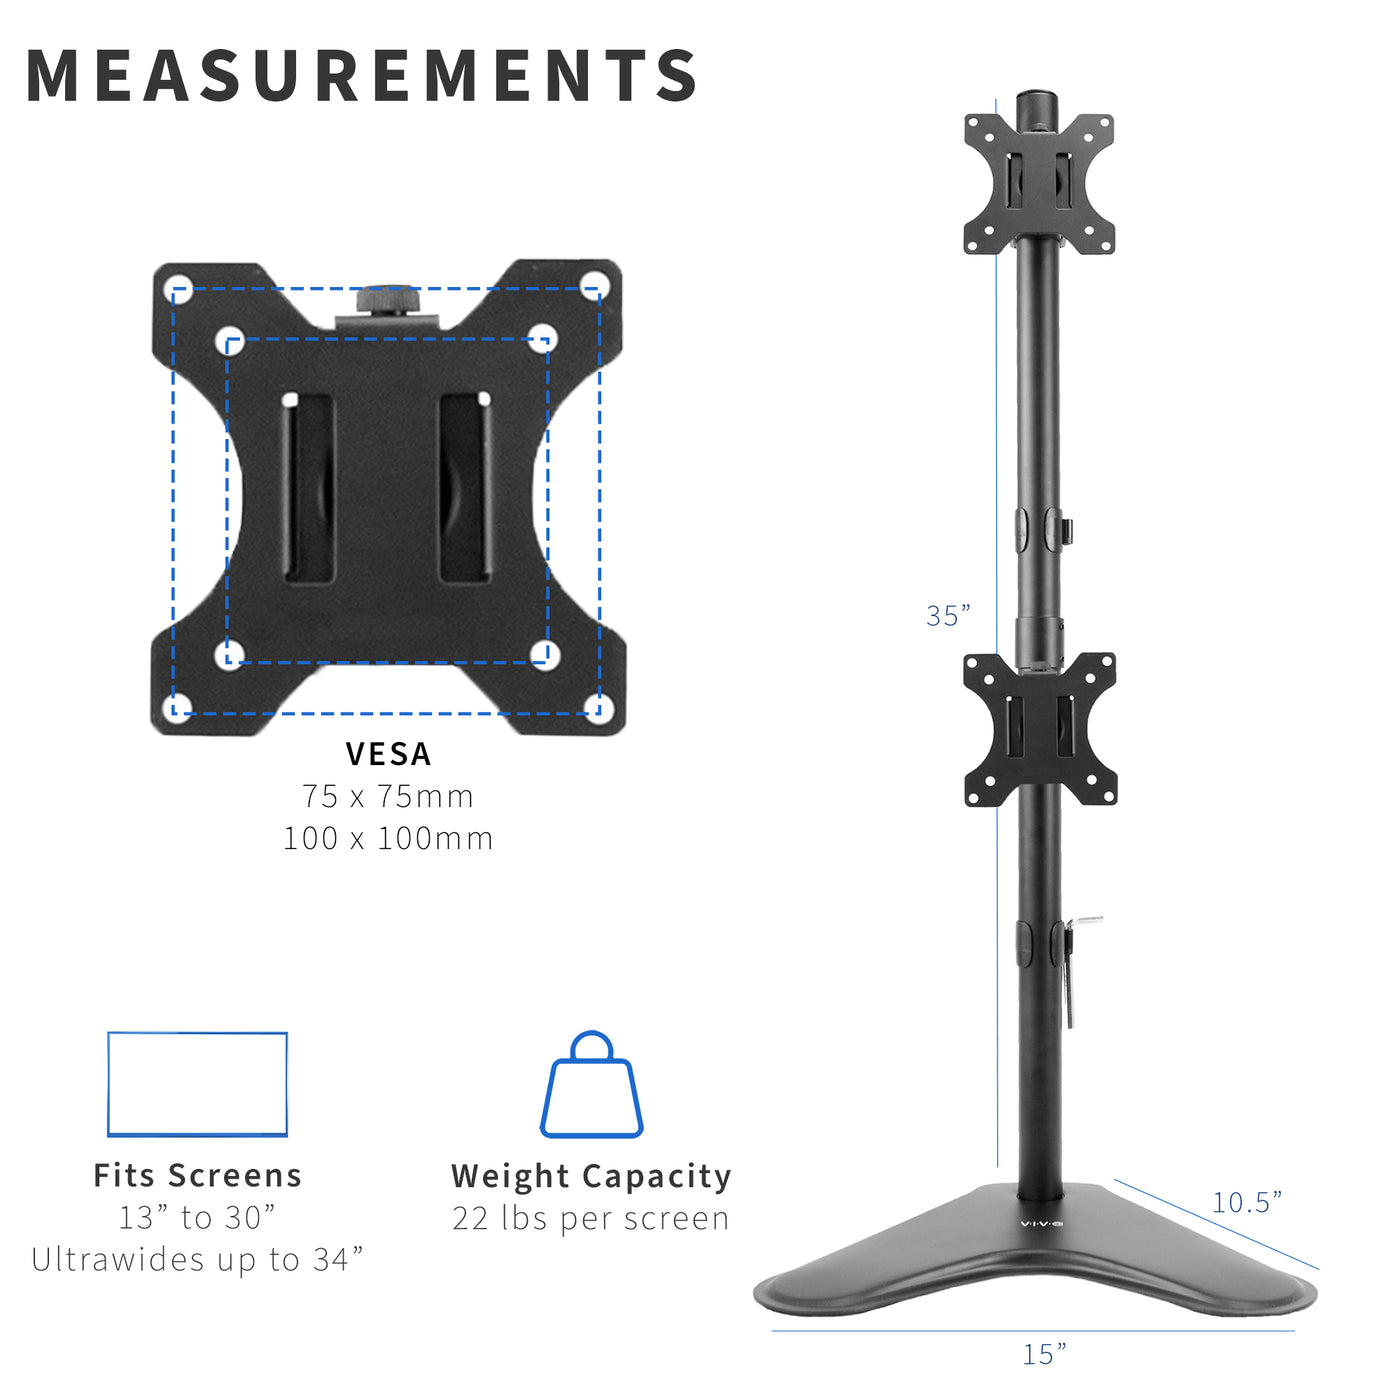 Dual Vertical Monitor Desk Stand – VIVO desk solutions, screen mounting,  and more